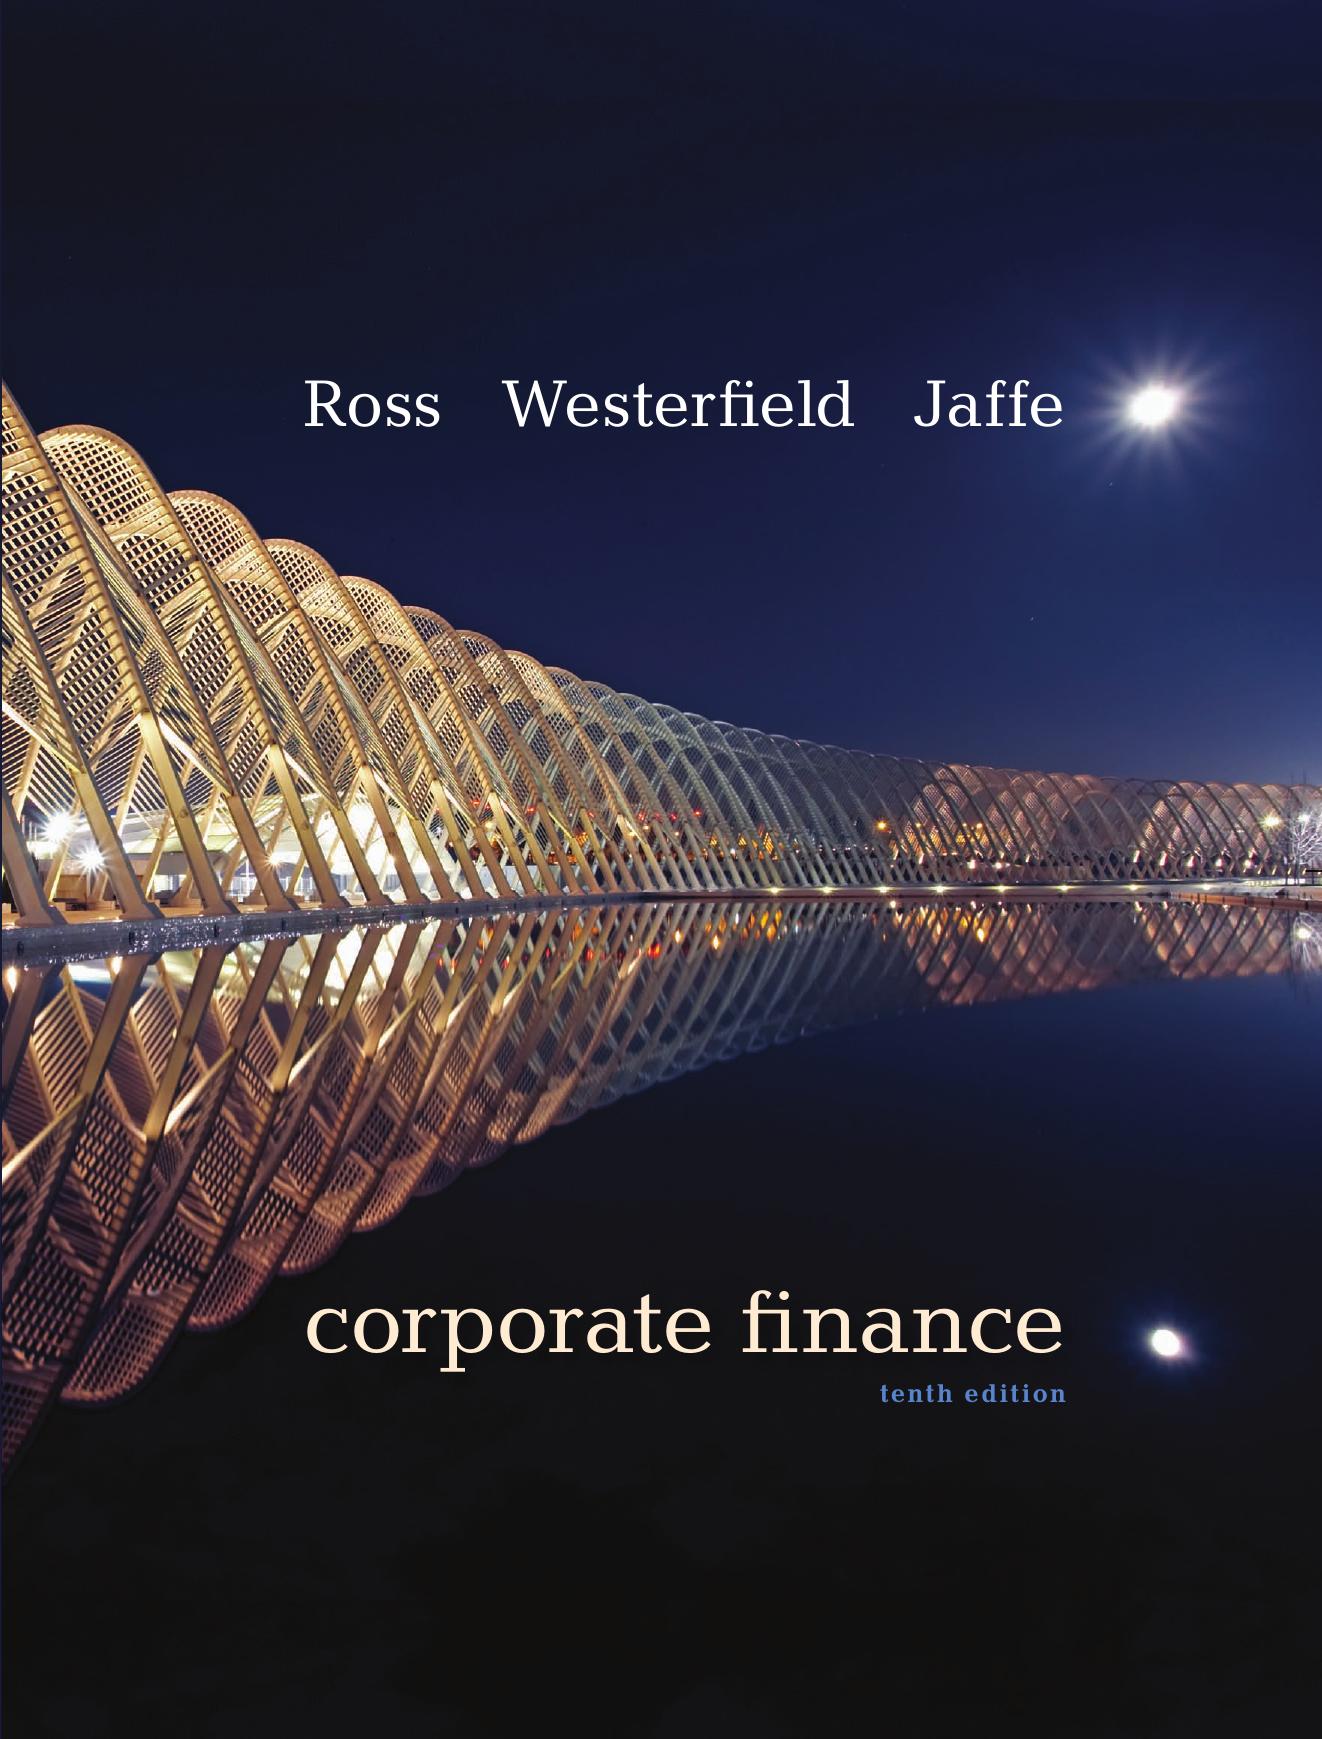 Corporate Finance, 10th edition (Mcgraw-Hill/Irwin Series in Finance, Insurance and Real Estate)